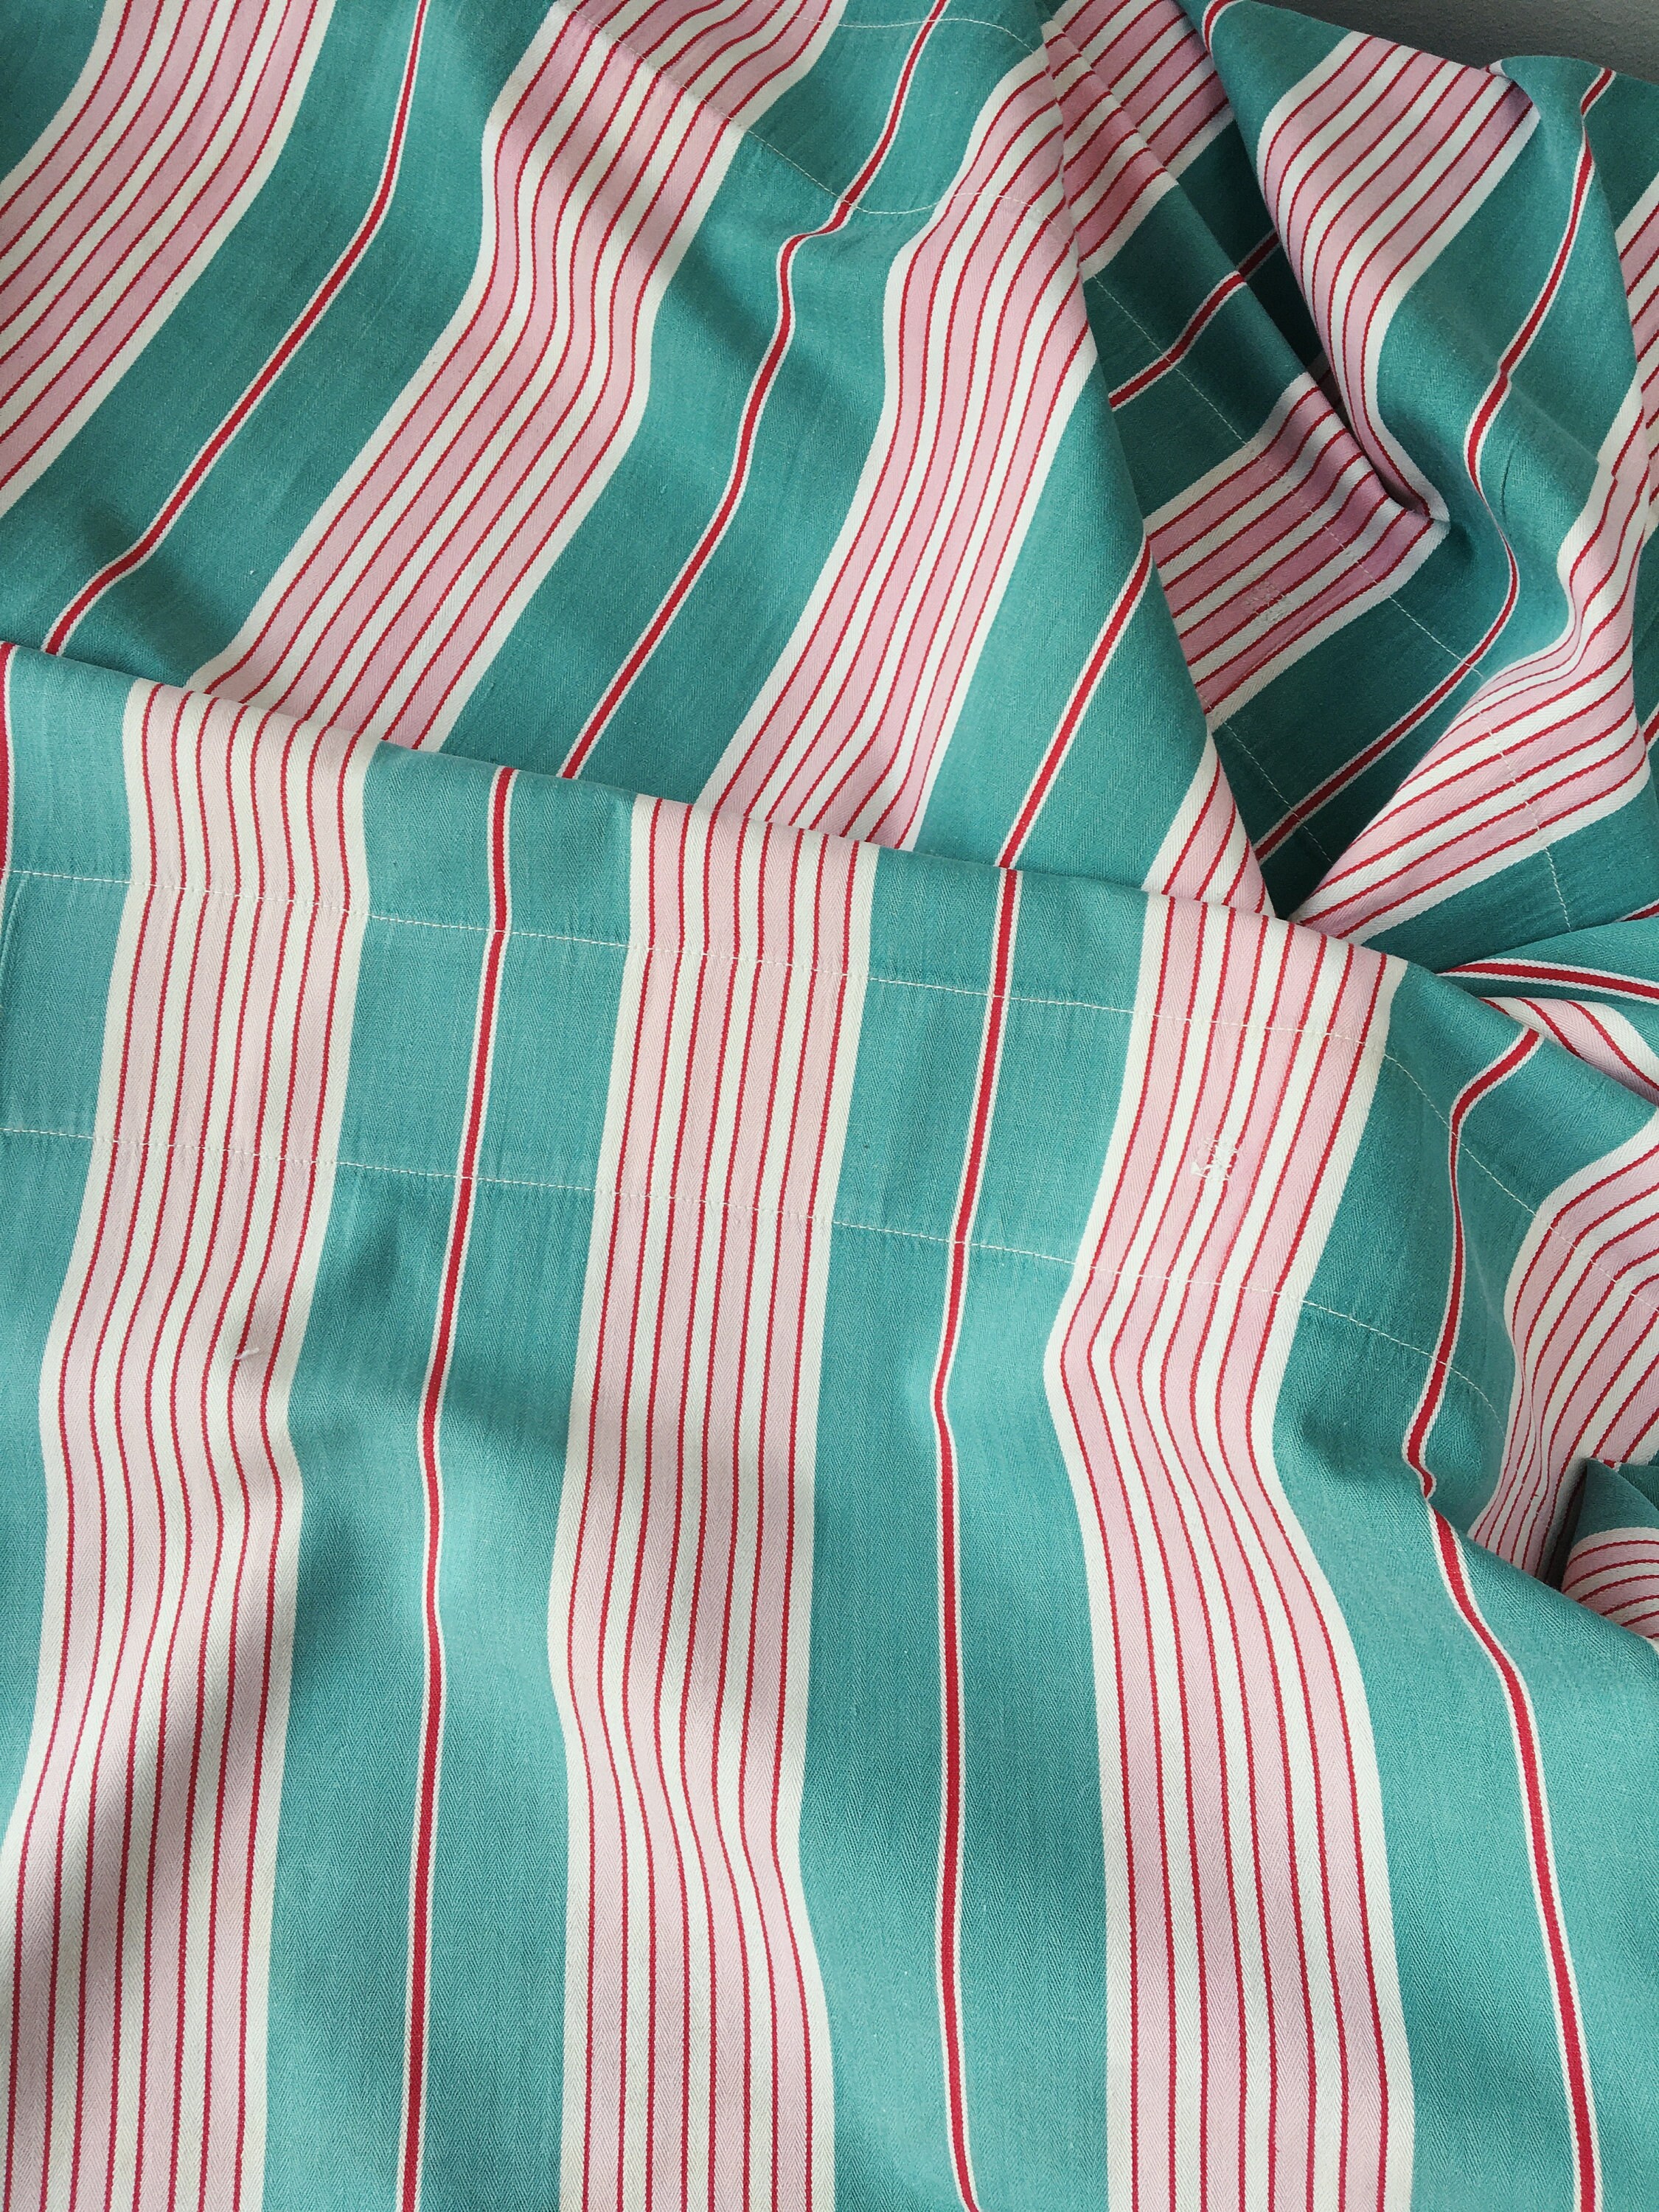 Heavy Weight Green Ticking Stripes Cotton Fabric By-The-Yard Quantity  Discounts